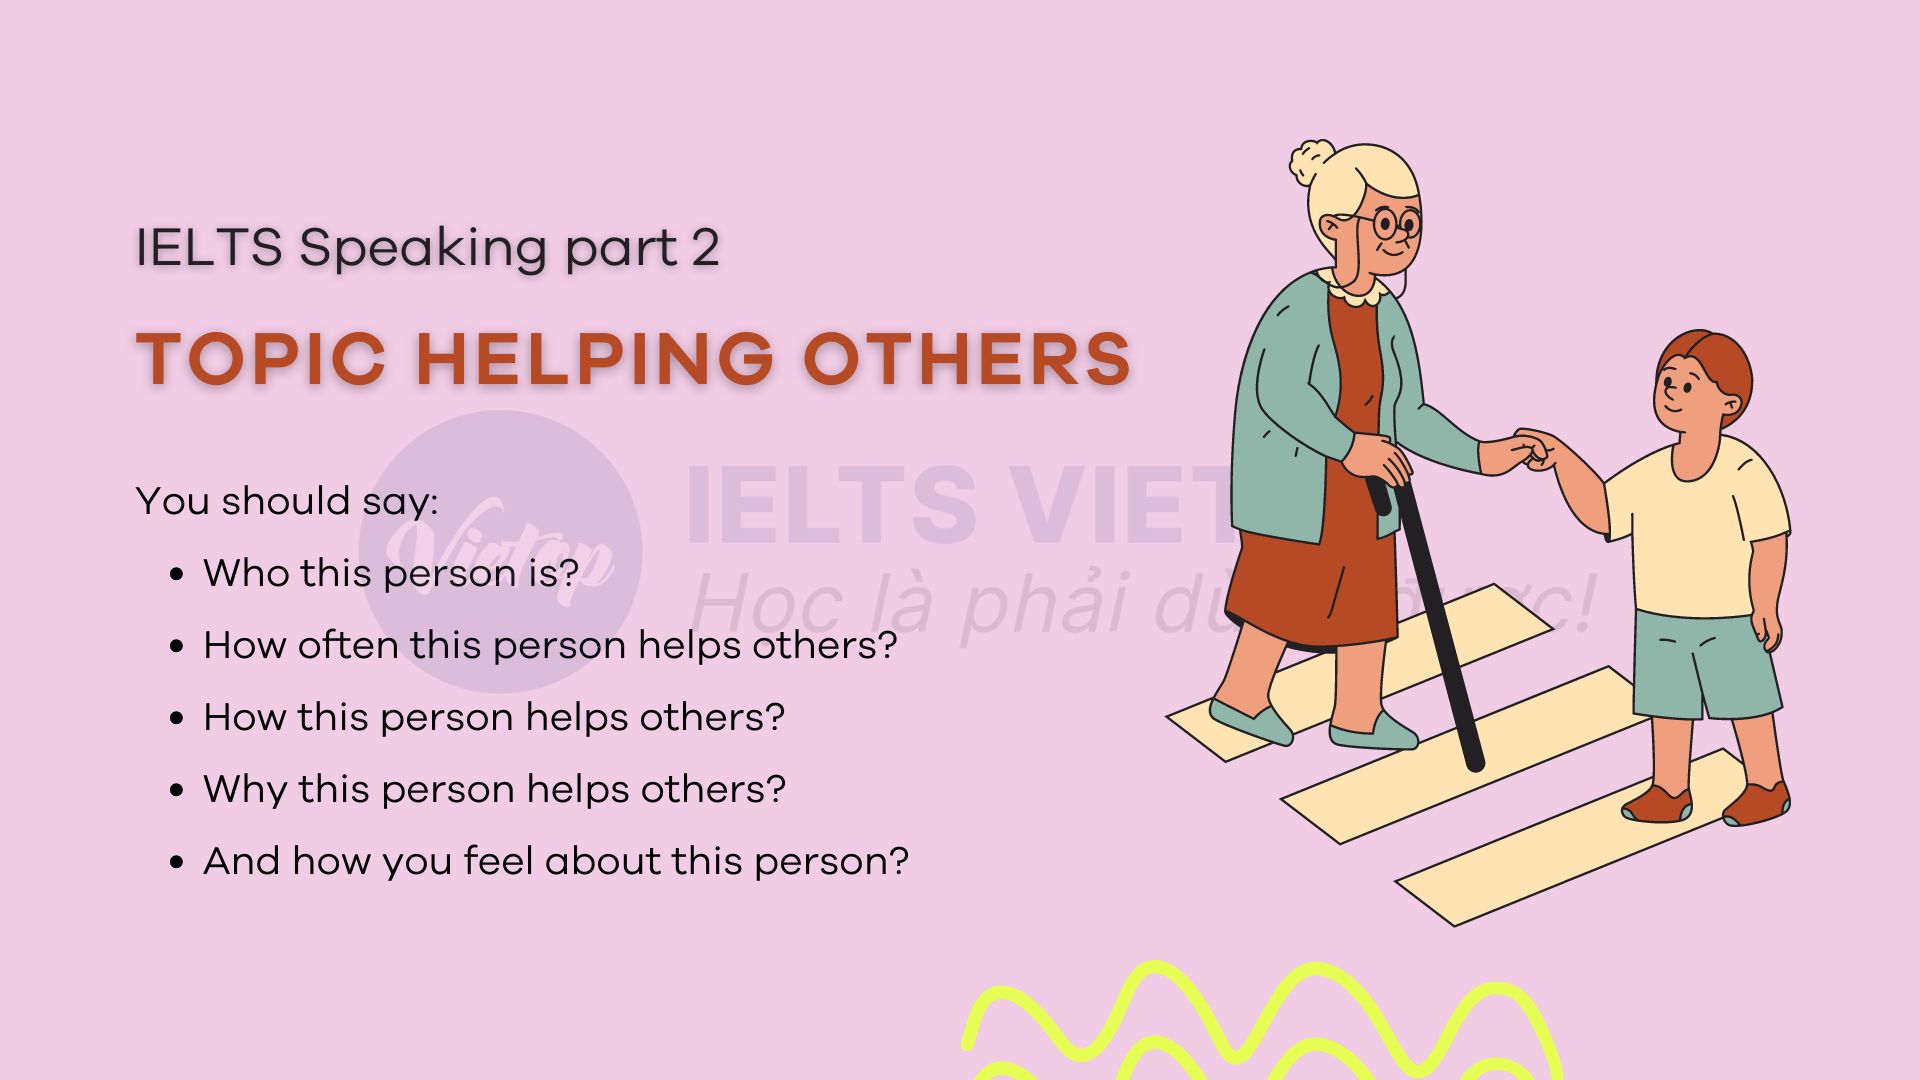 Describe a person who often helps others - IELTS Speaking part 2